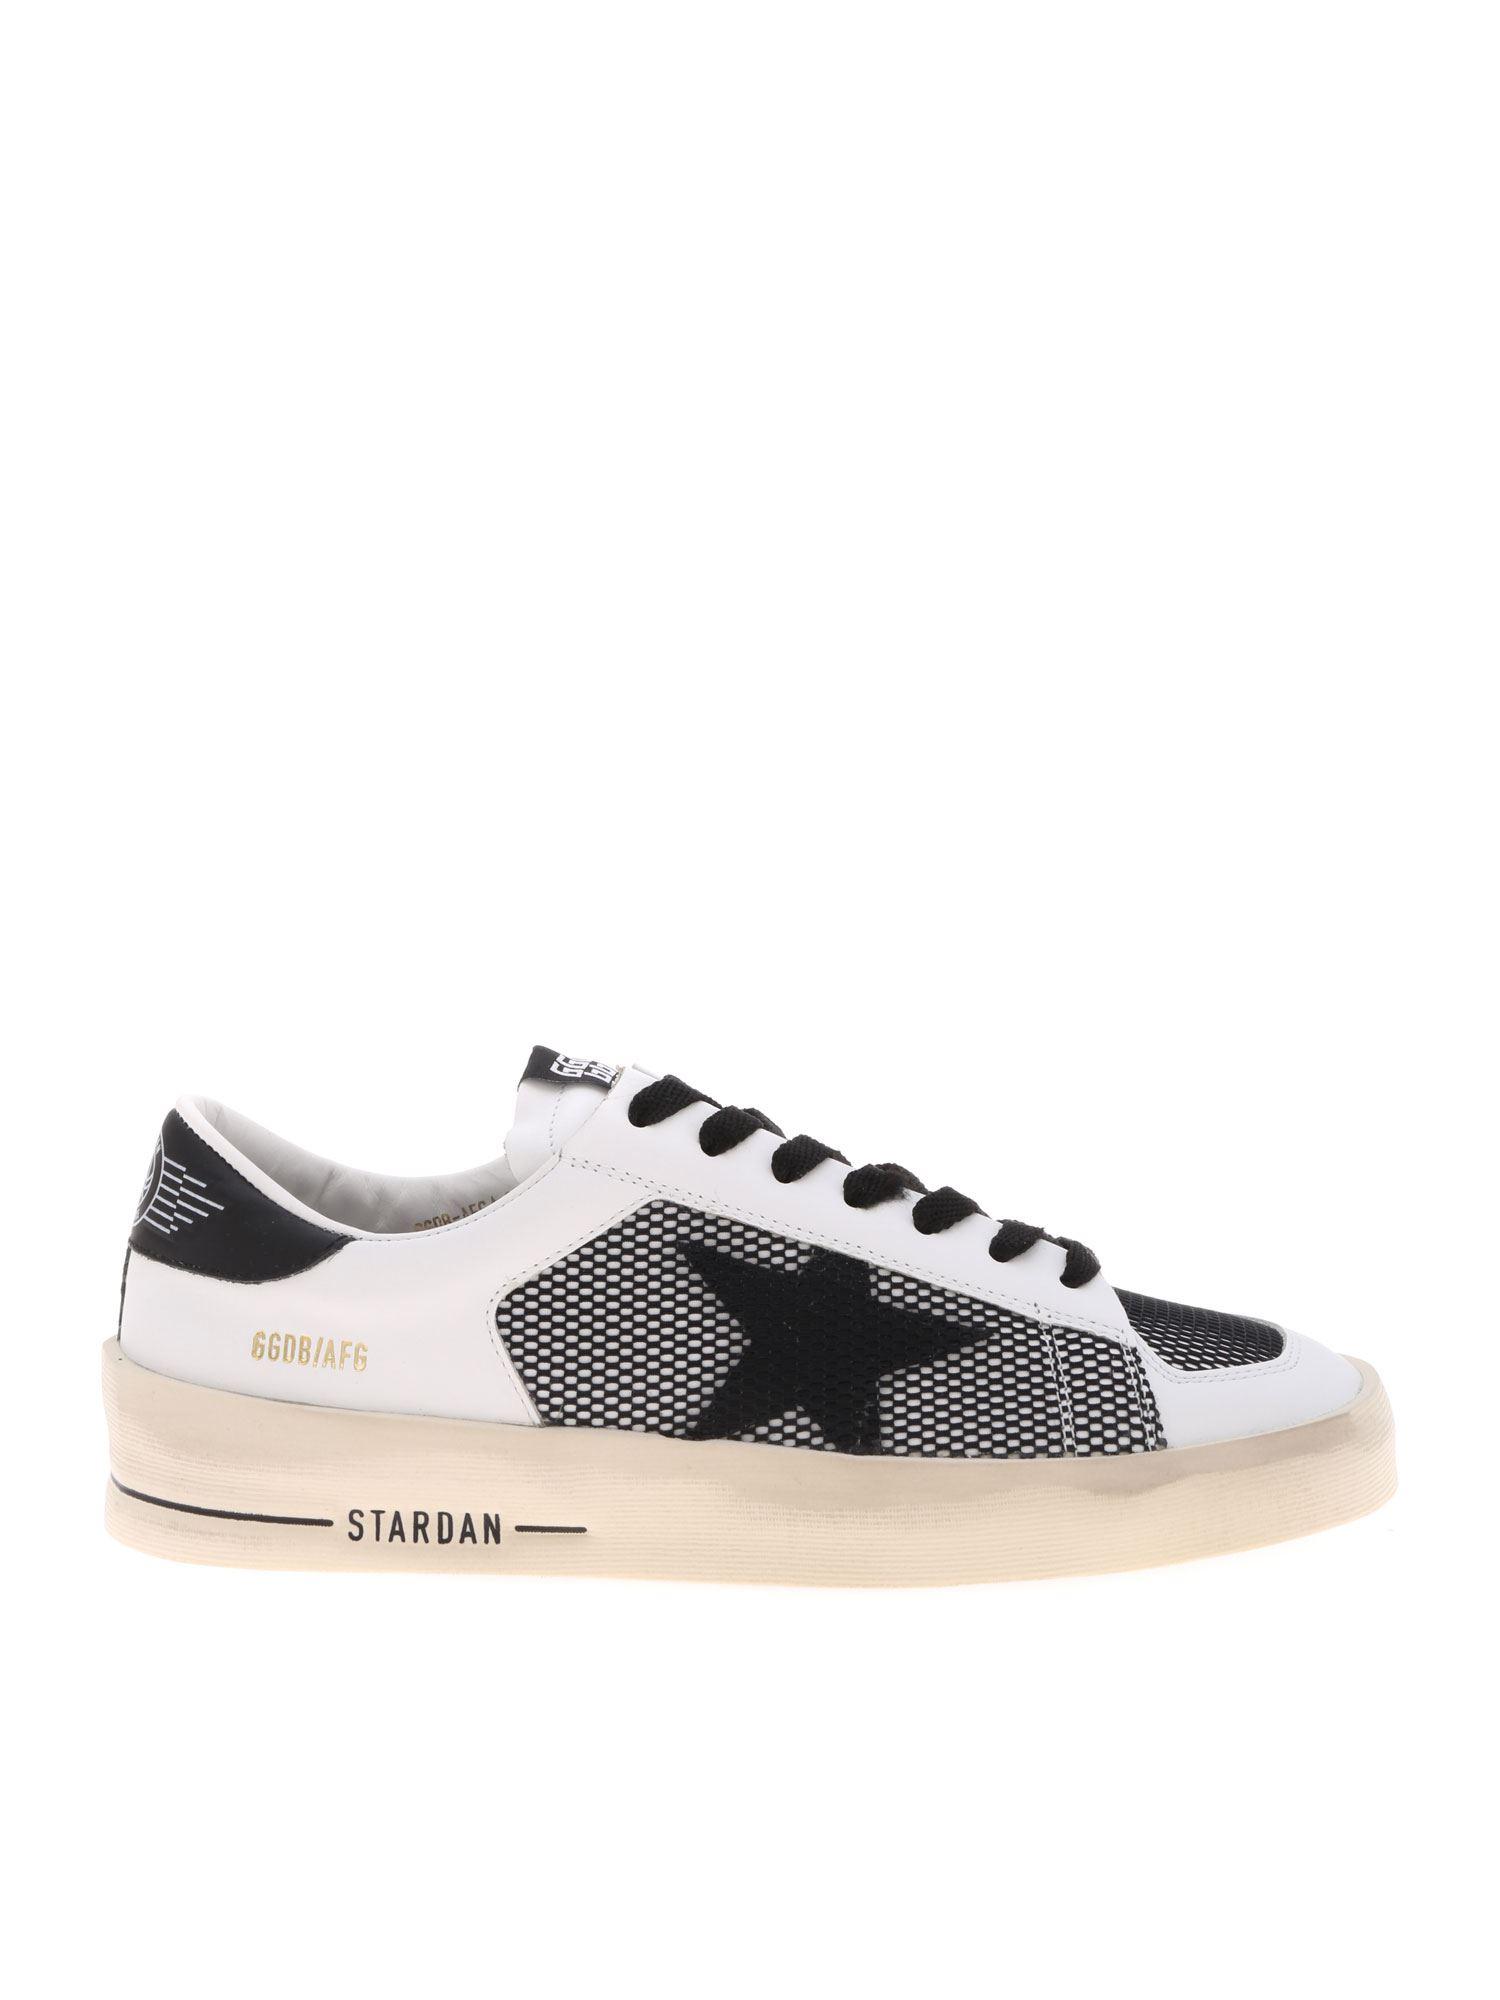 Golden Goose Deluxe Brand Leather Stardan Sneakers In Black And White ...